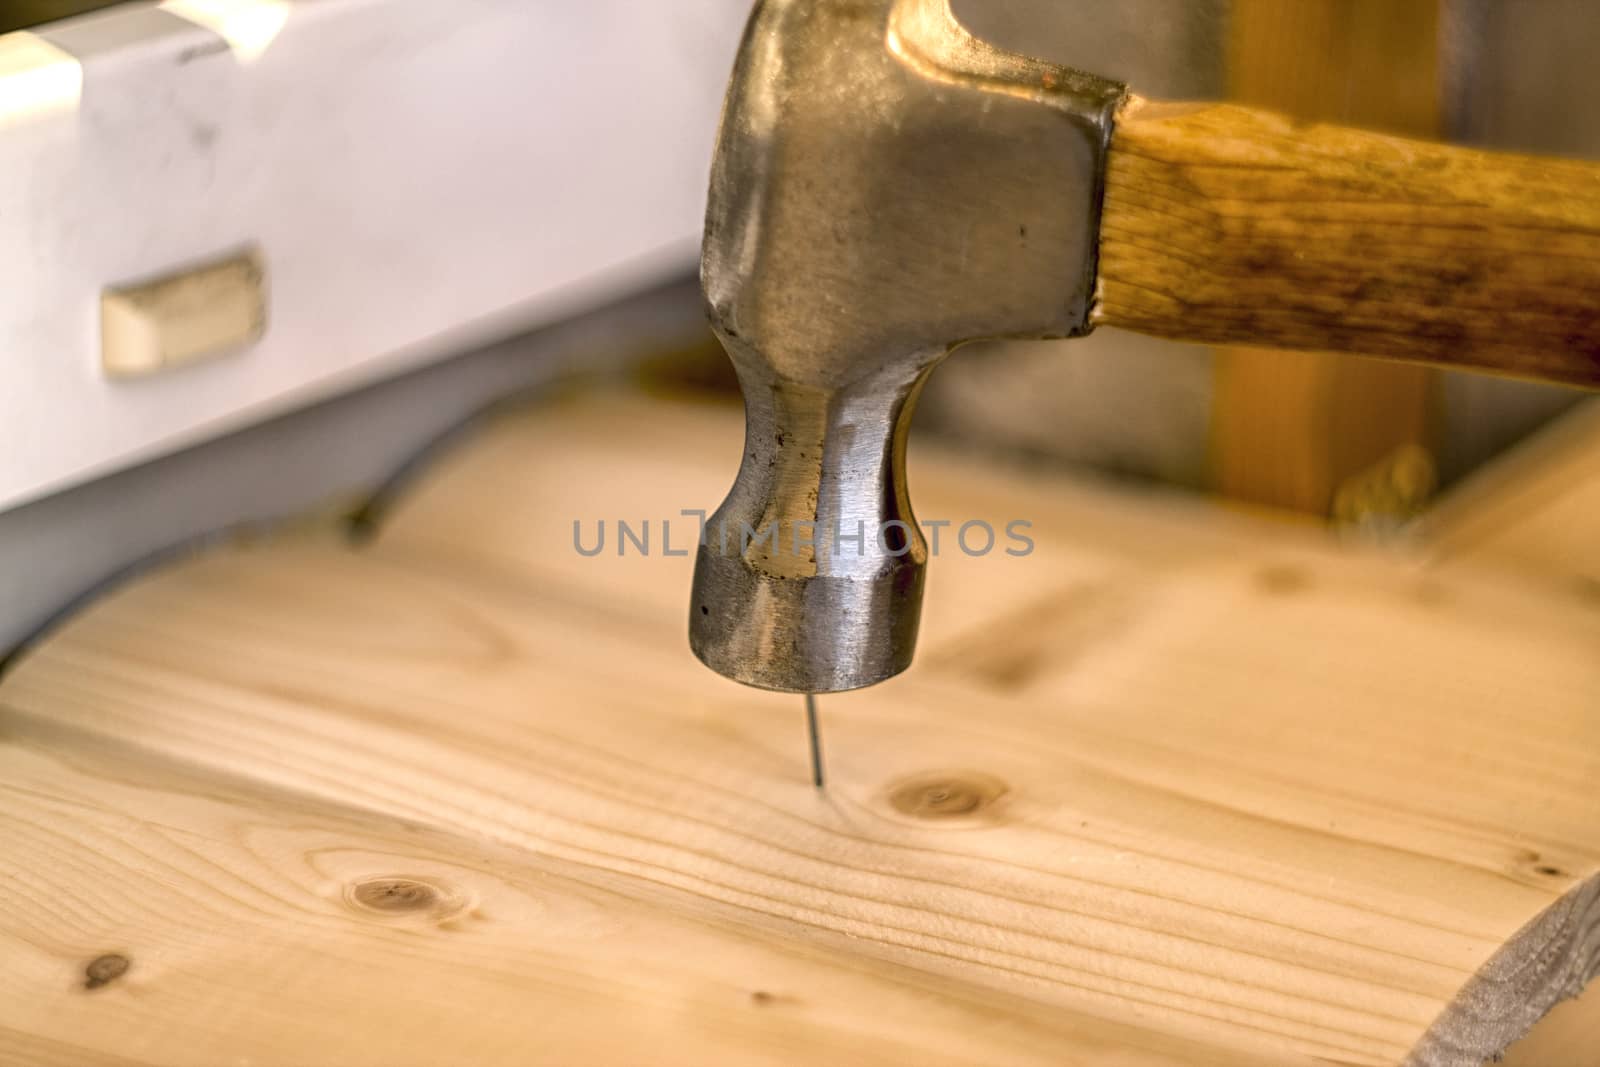 Hammer clogs a nail into a wooden board by nolimit046